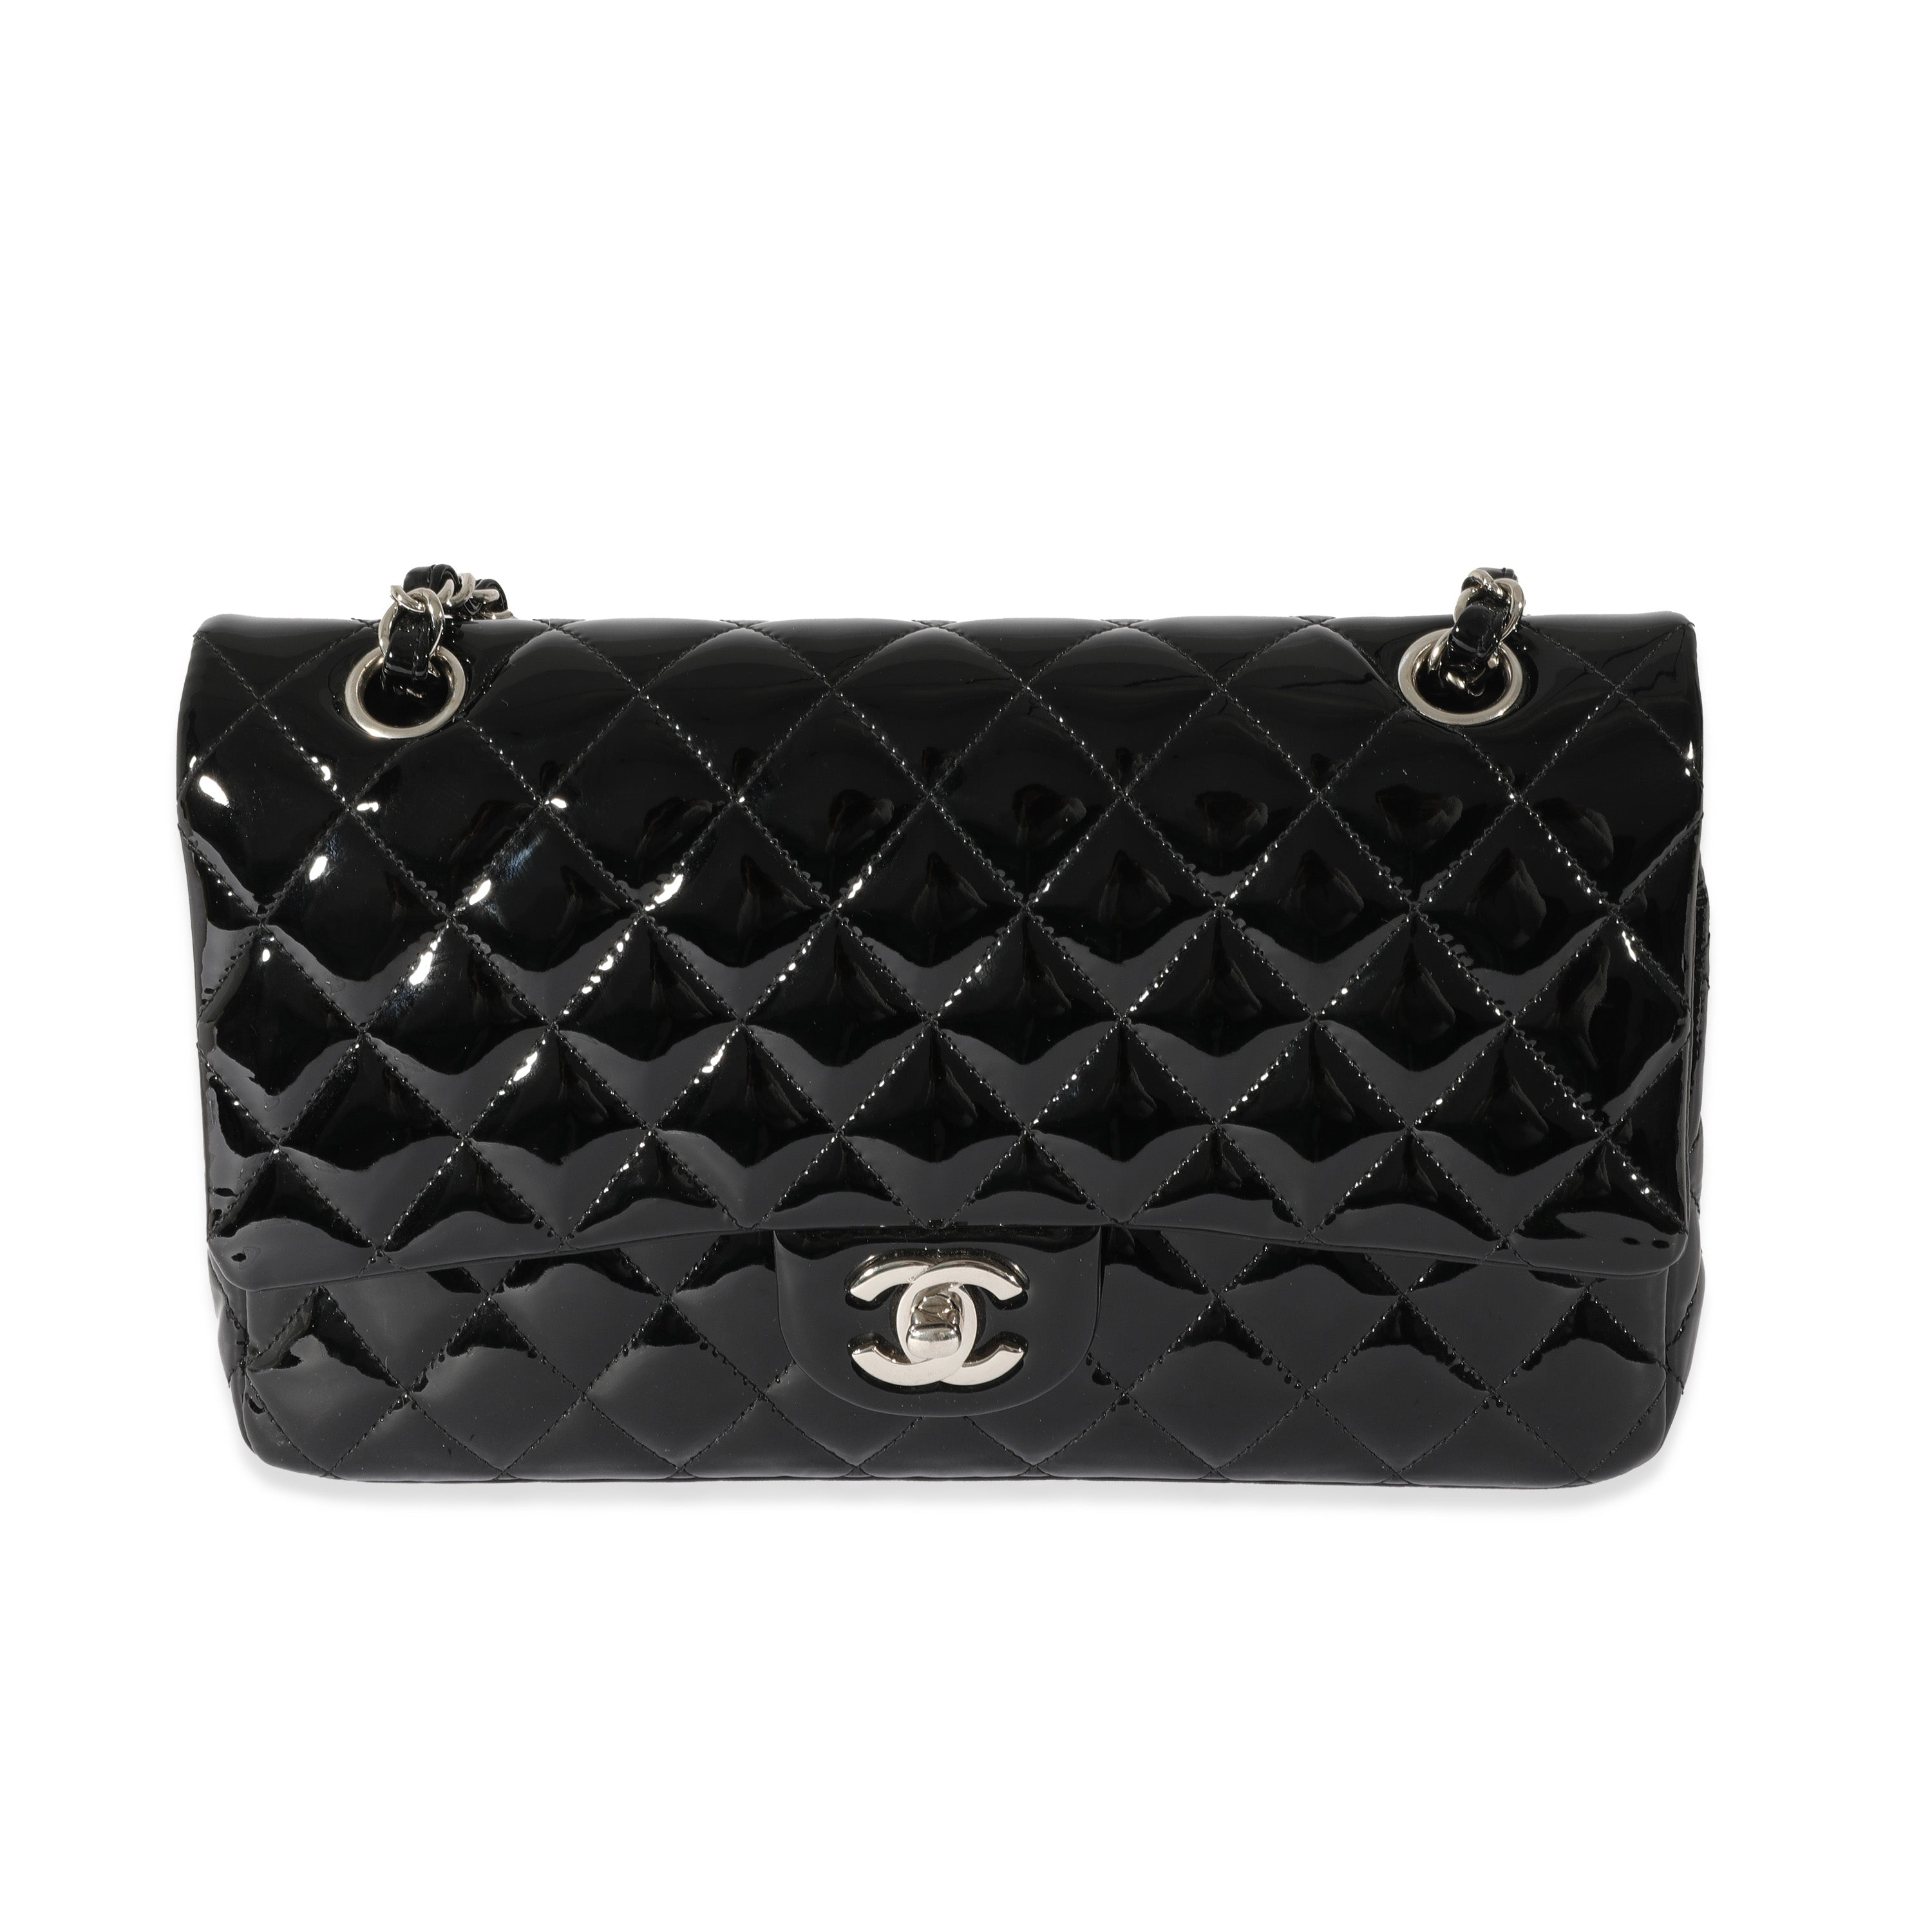 Chanel Vintage Black Quilted Patent Lunch Box Bag, myGemma